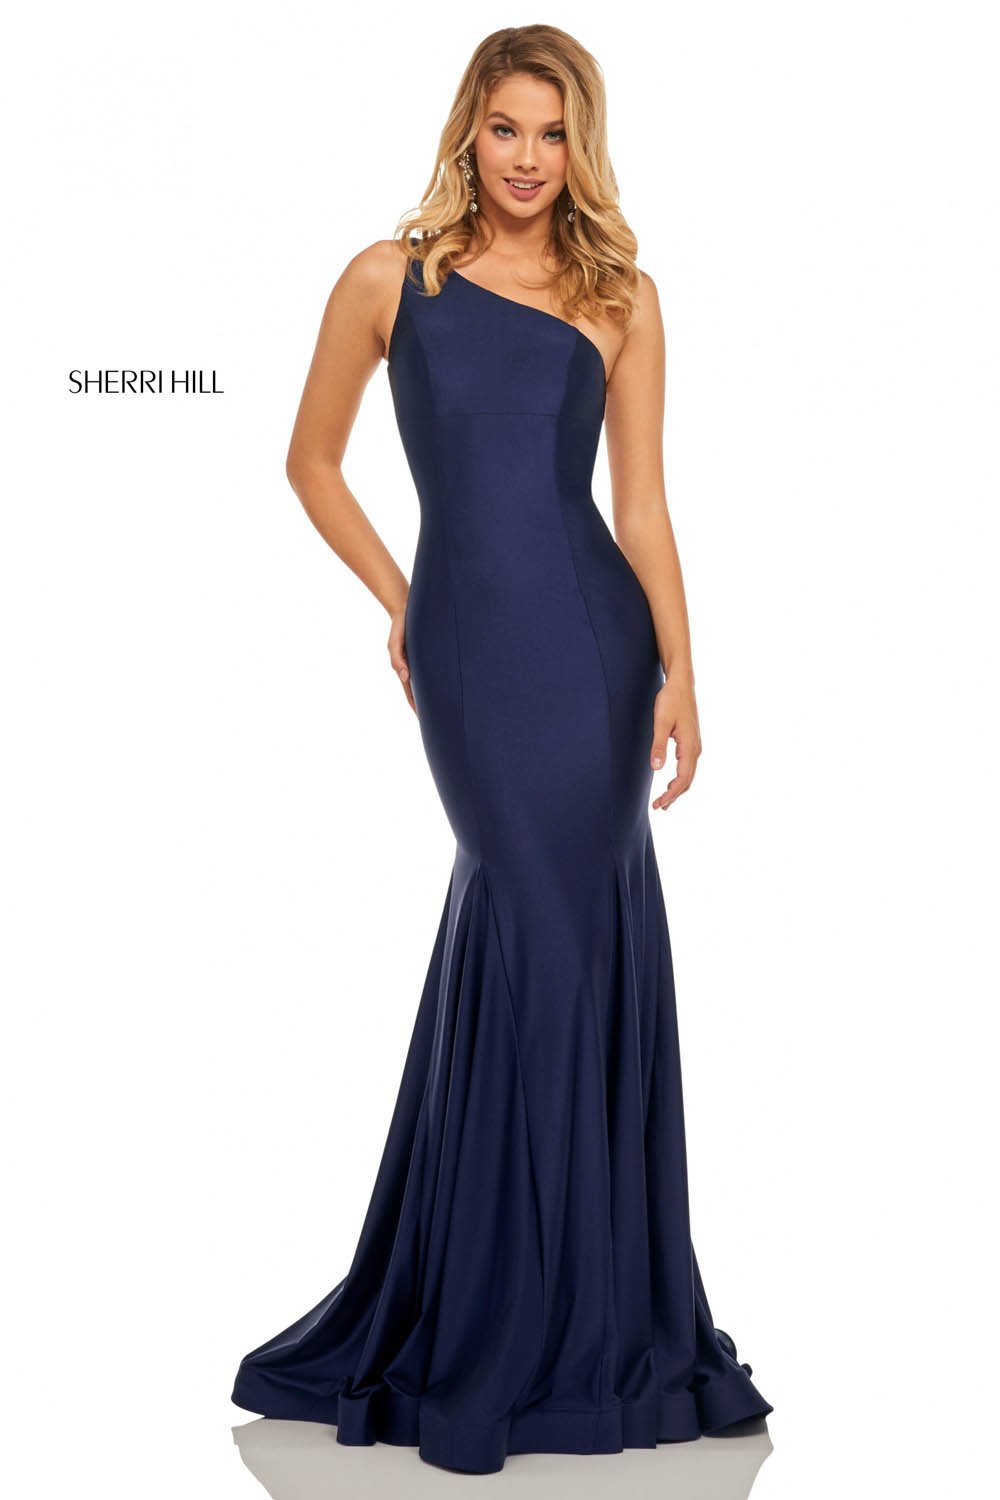 Sherri Hill 52781 dress images in these colors: Black, Wine, Royal, Red, Navy, Berry, Blush, Yellow, Orchid, Light Blue.